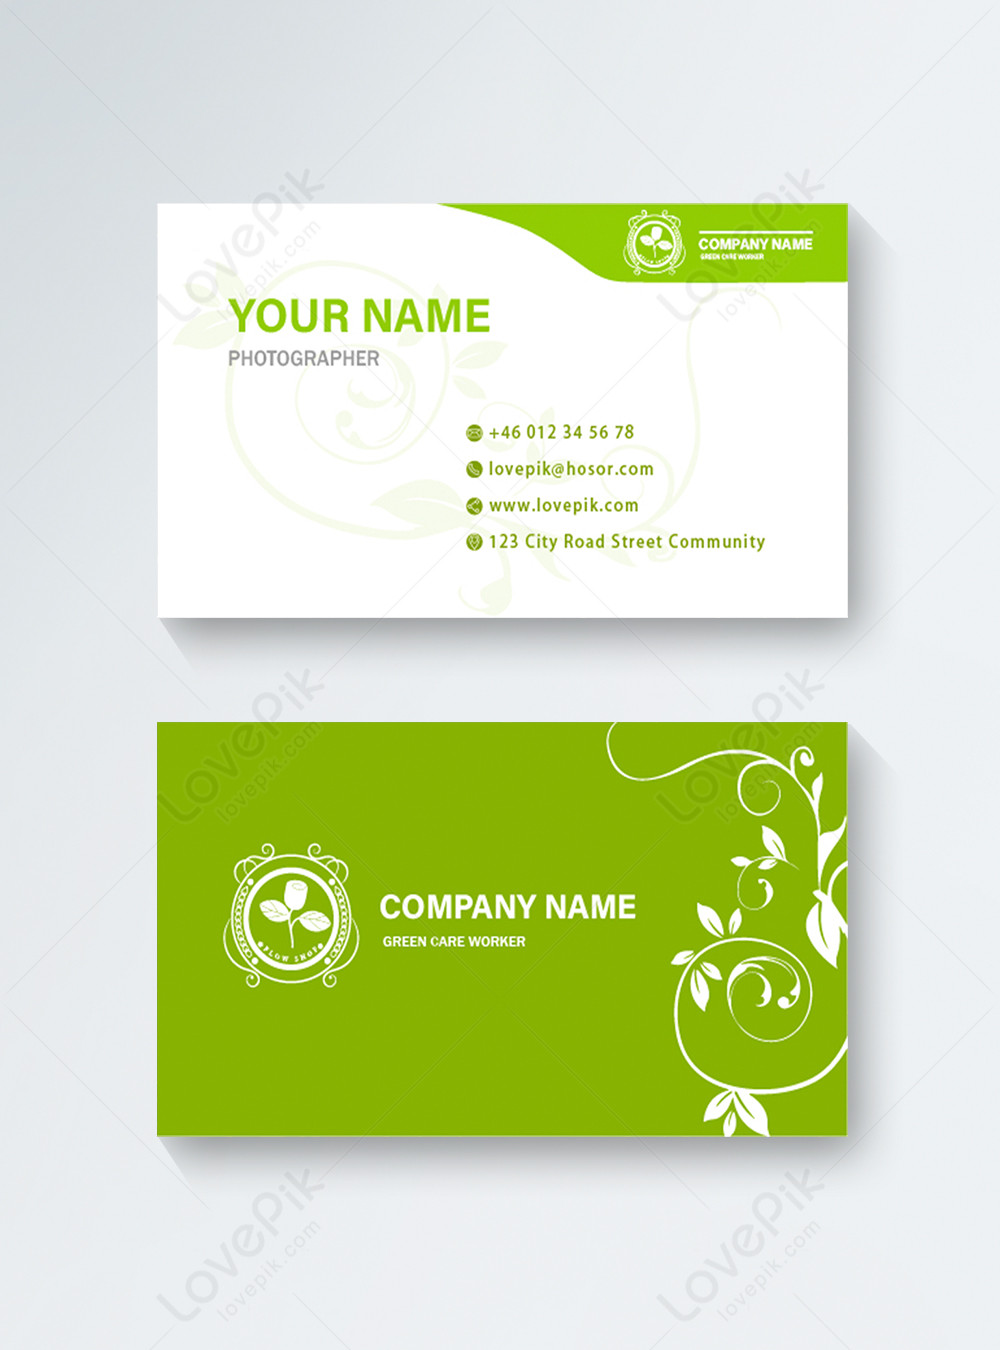 Green lawn care business card template image_picture free download With Lawn Care Business Cards Templates Free